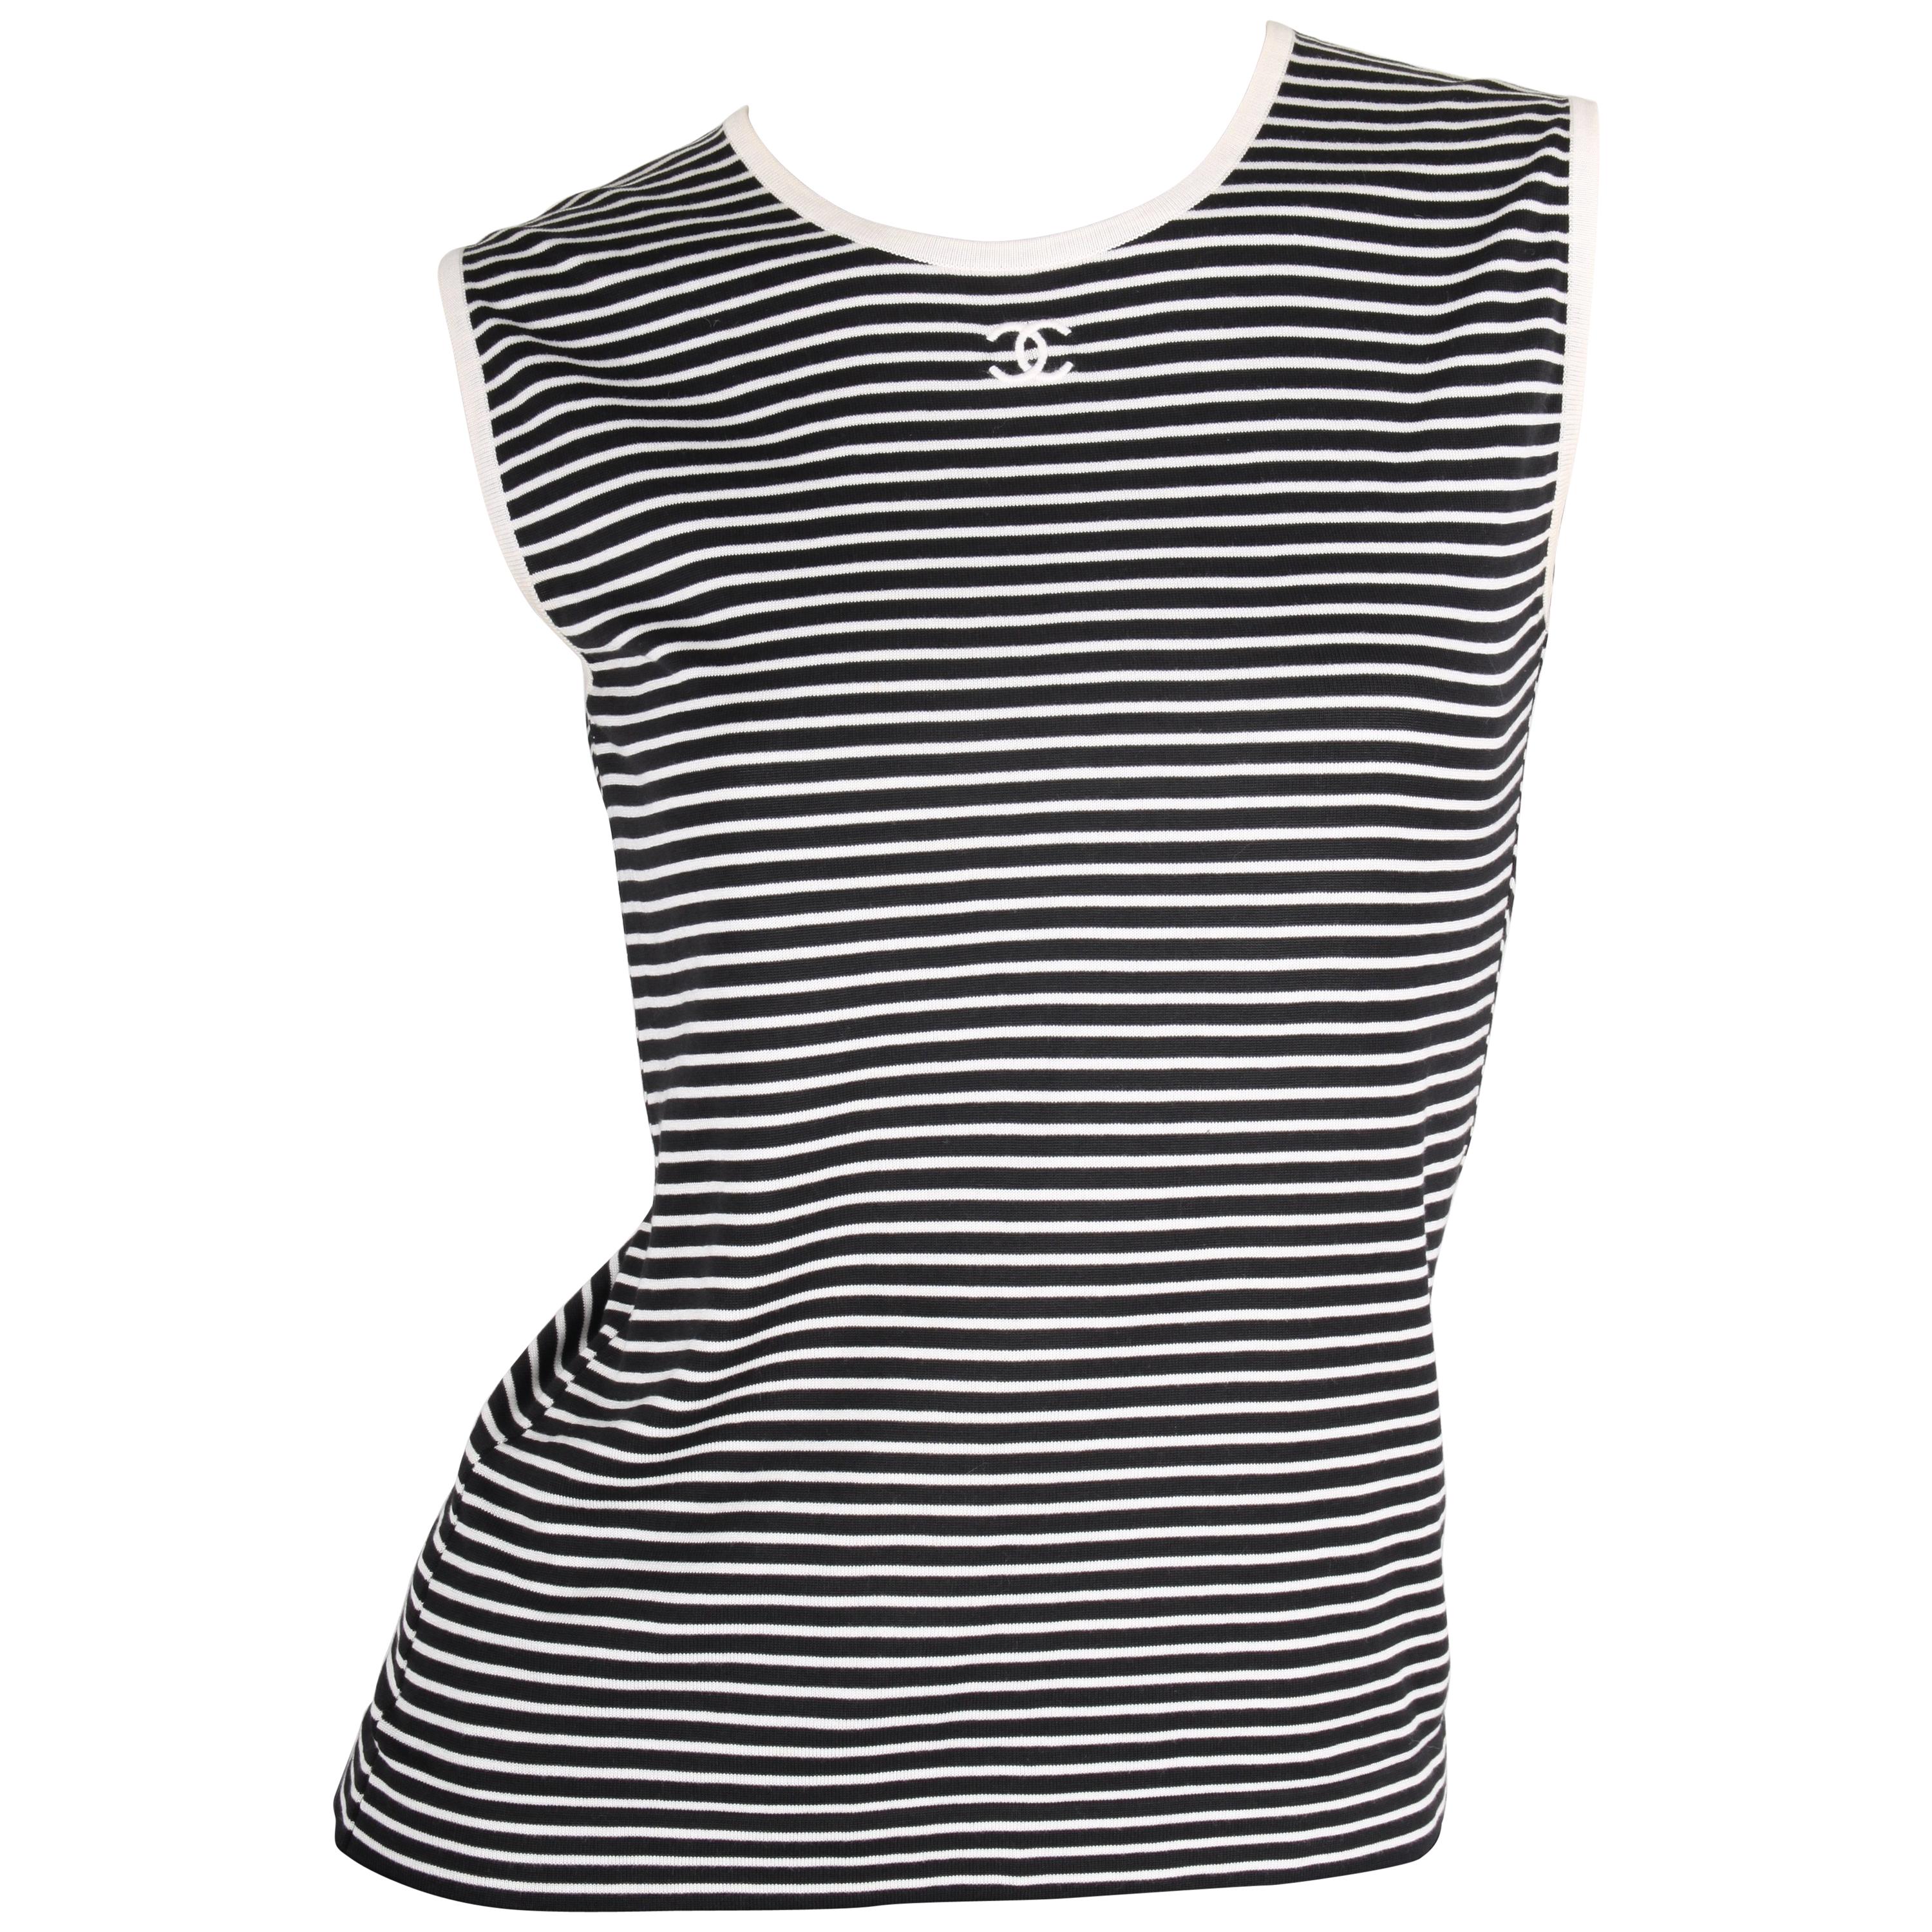 Chanel Striped Sleeveless Top - black & white For Sale